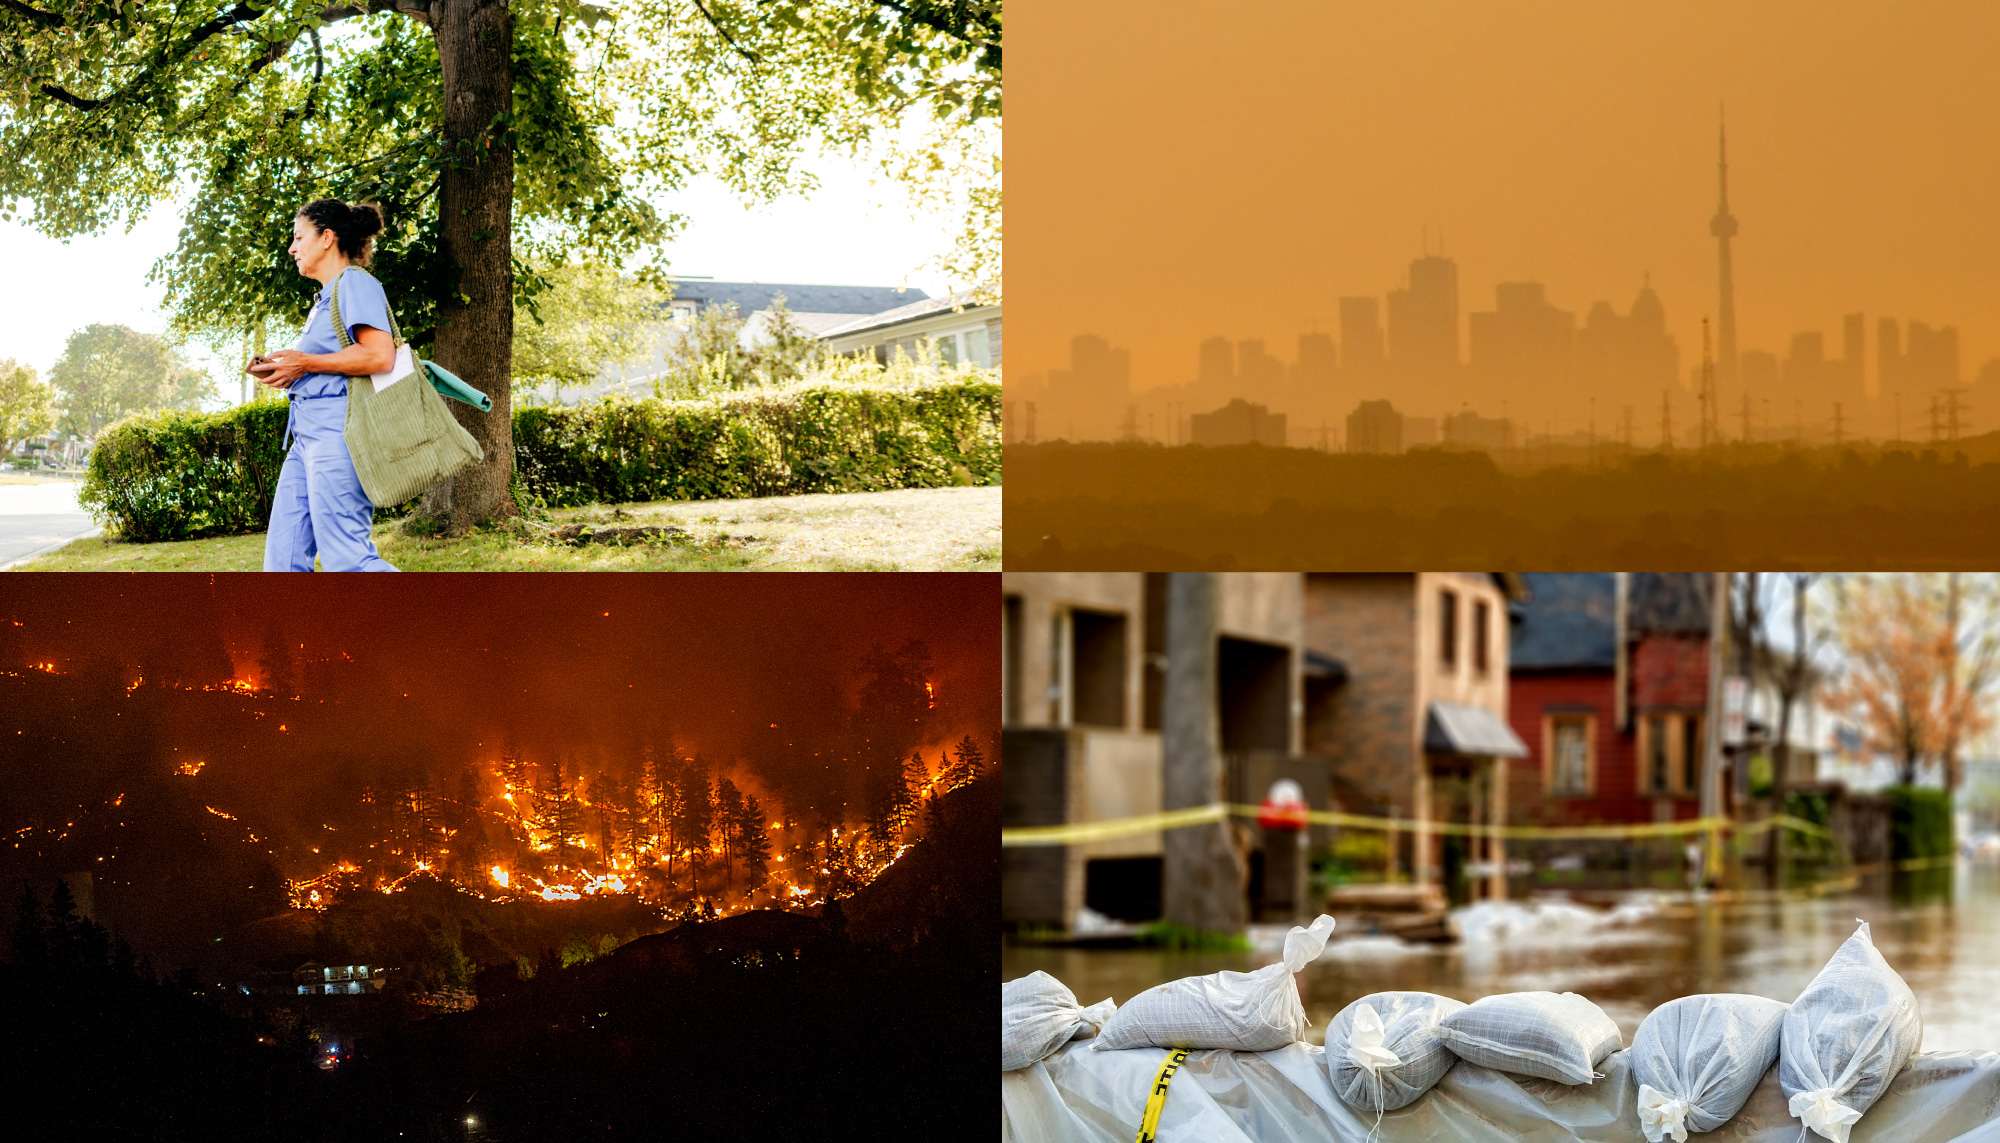 collage of images: a woman walking, smog over a skyline, forest fires, and sandbags for flooding